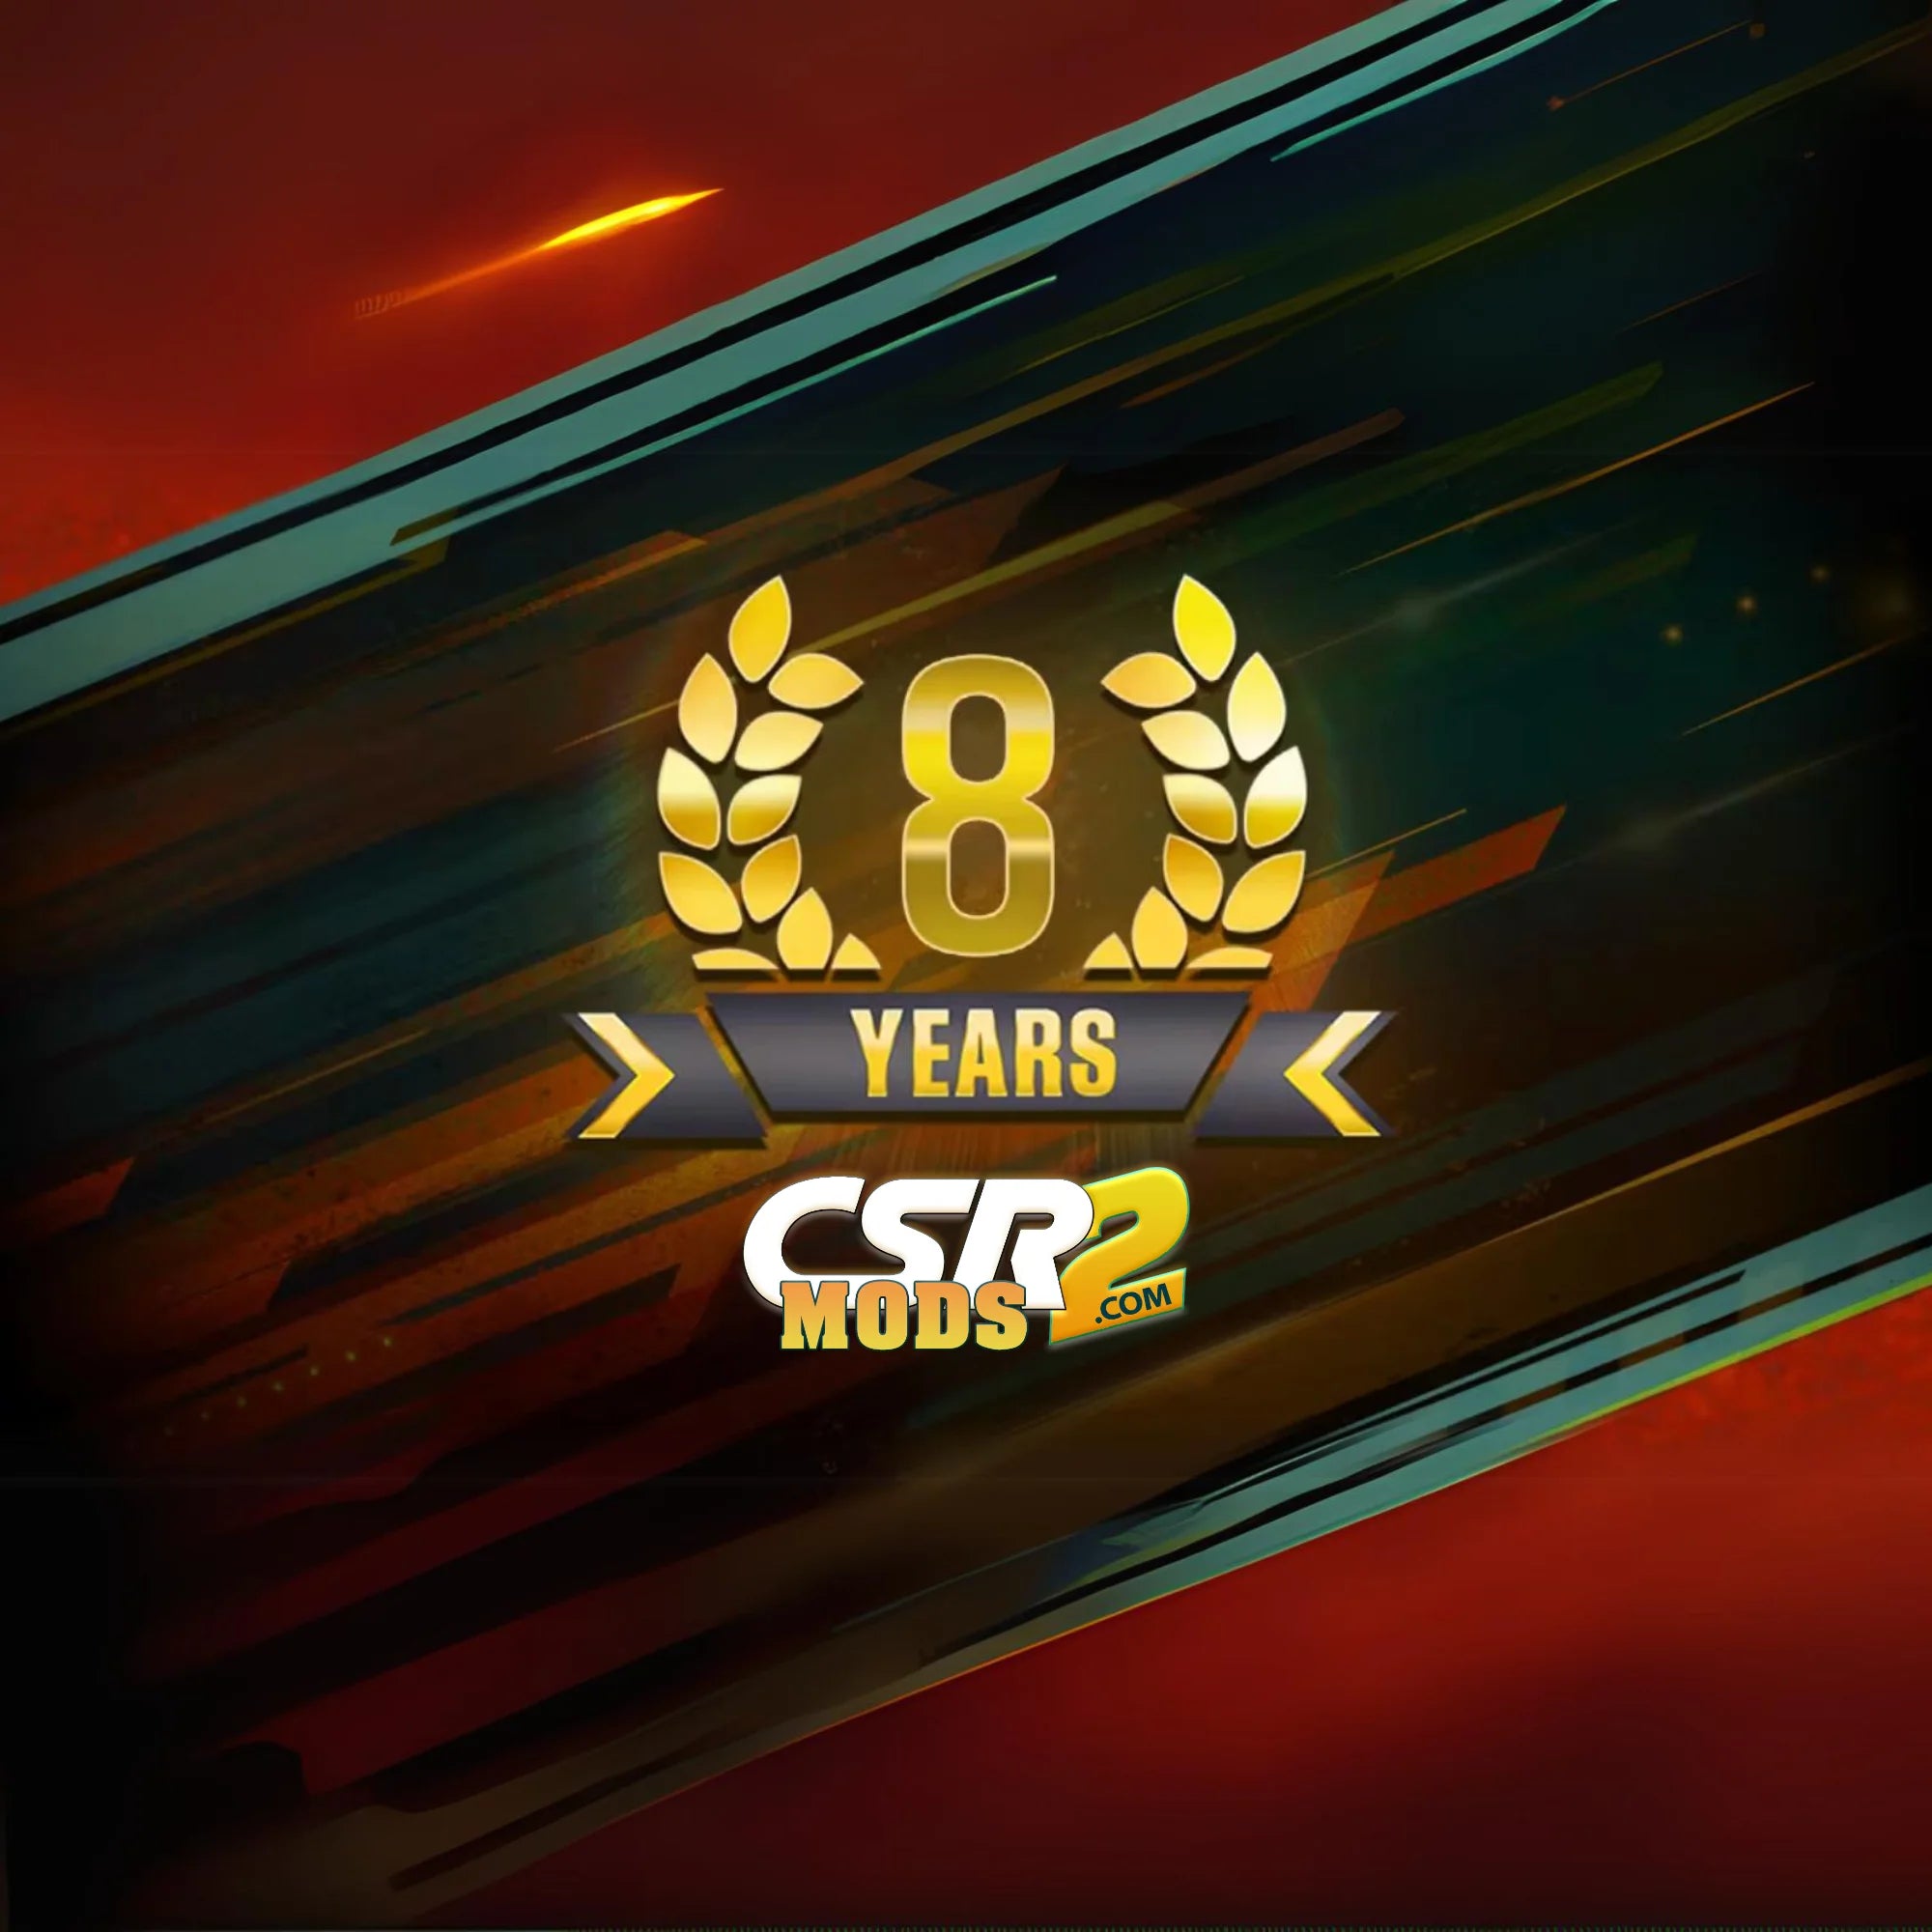 CSR2MODS Celebrates CSR2’s 8th Anniversary with an Exciting New Update!